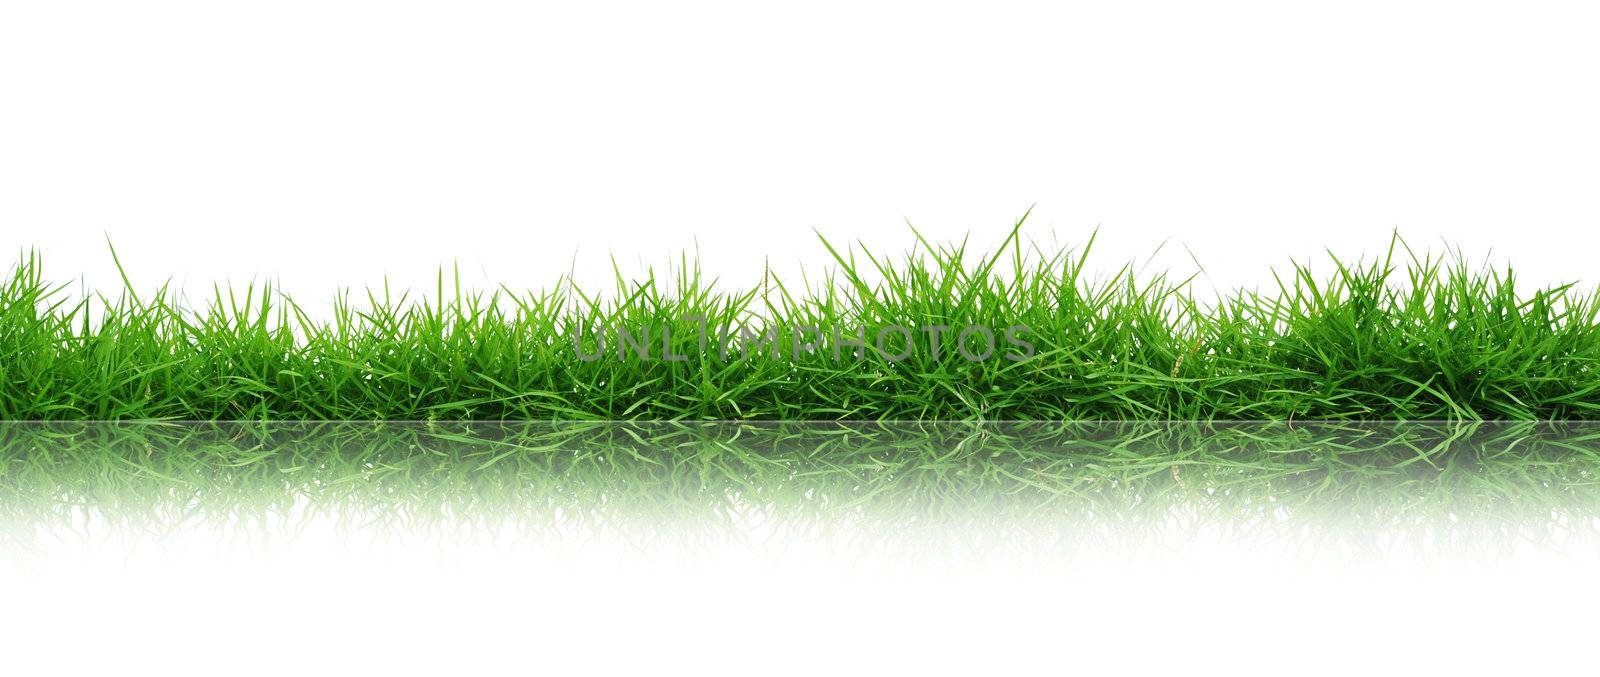 Grass Isolated on white